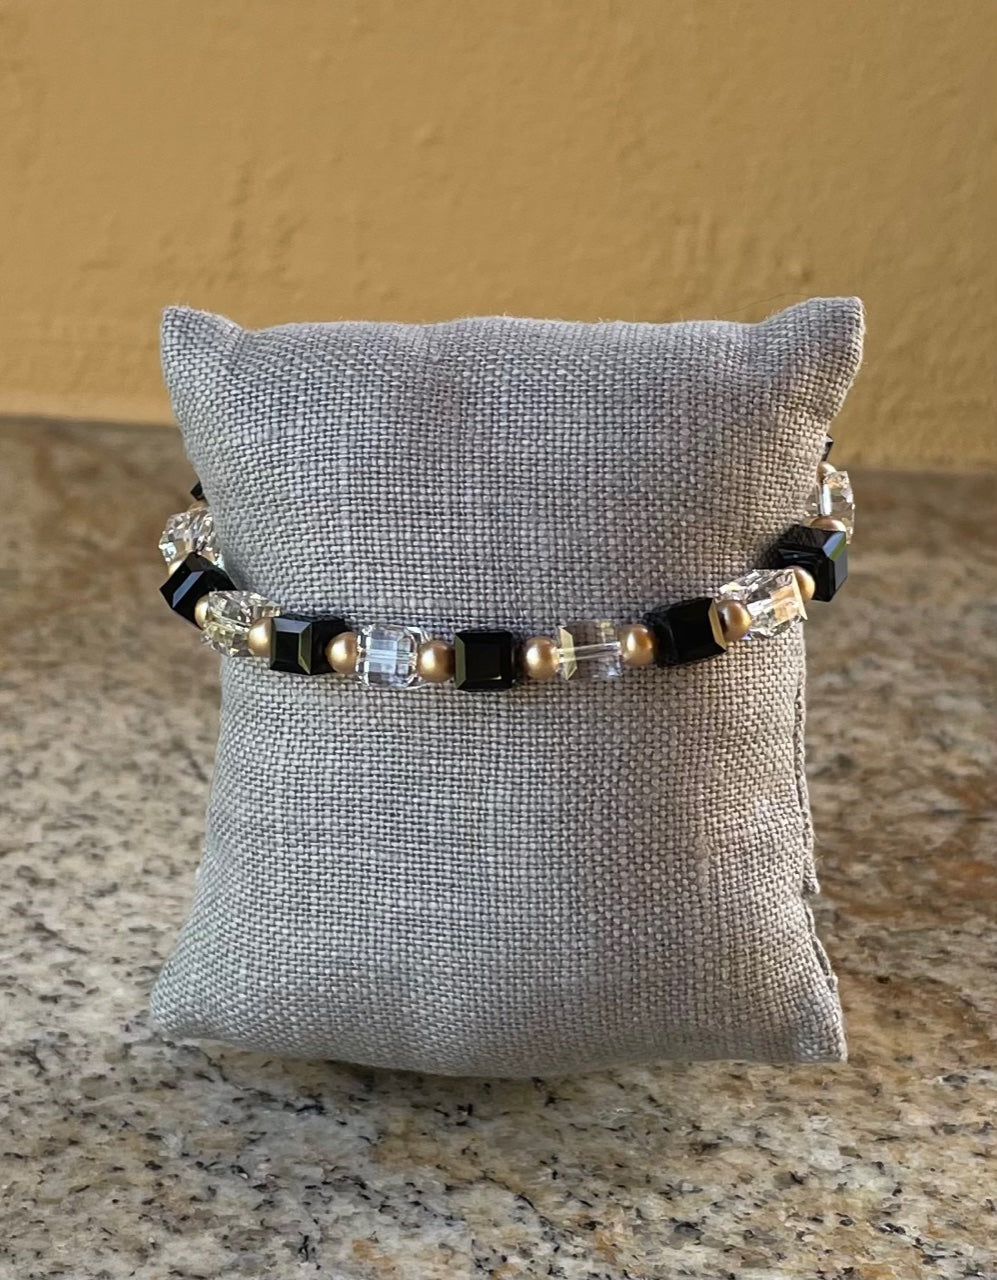 Bracelet - Black, gold and clear Swarovski crystals with 14K gold filled clasp